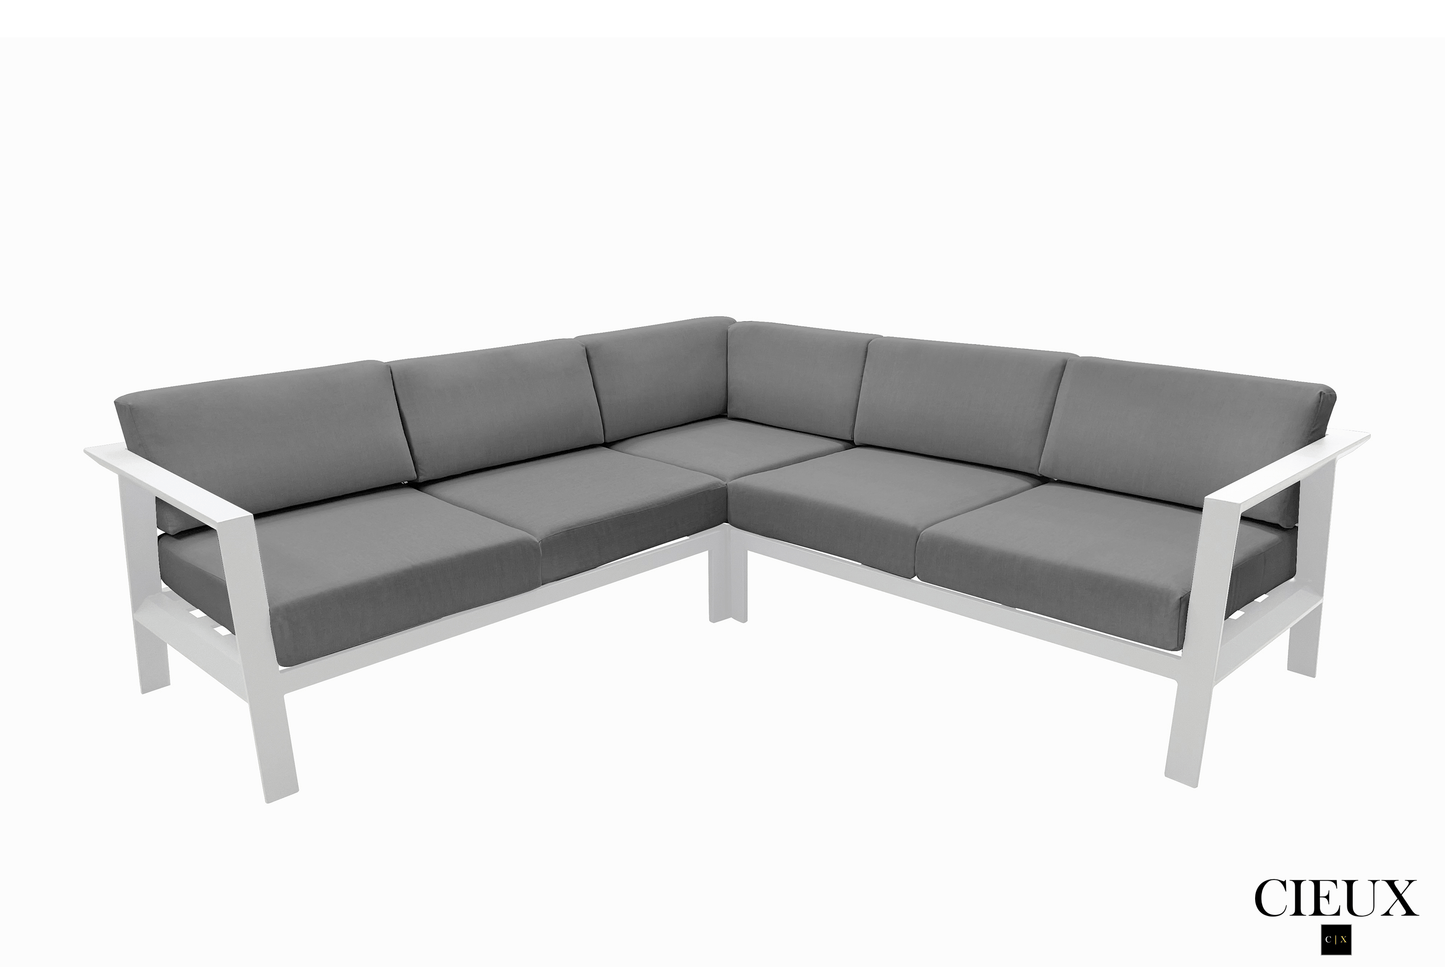 Pending - Cieux Canvas Charcoal Corsica Outdoor Patio Aluminum Metal Corner Sectional Sofa in White with Sunbrella Cushions - Available in 2 Colours